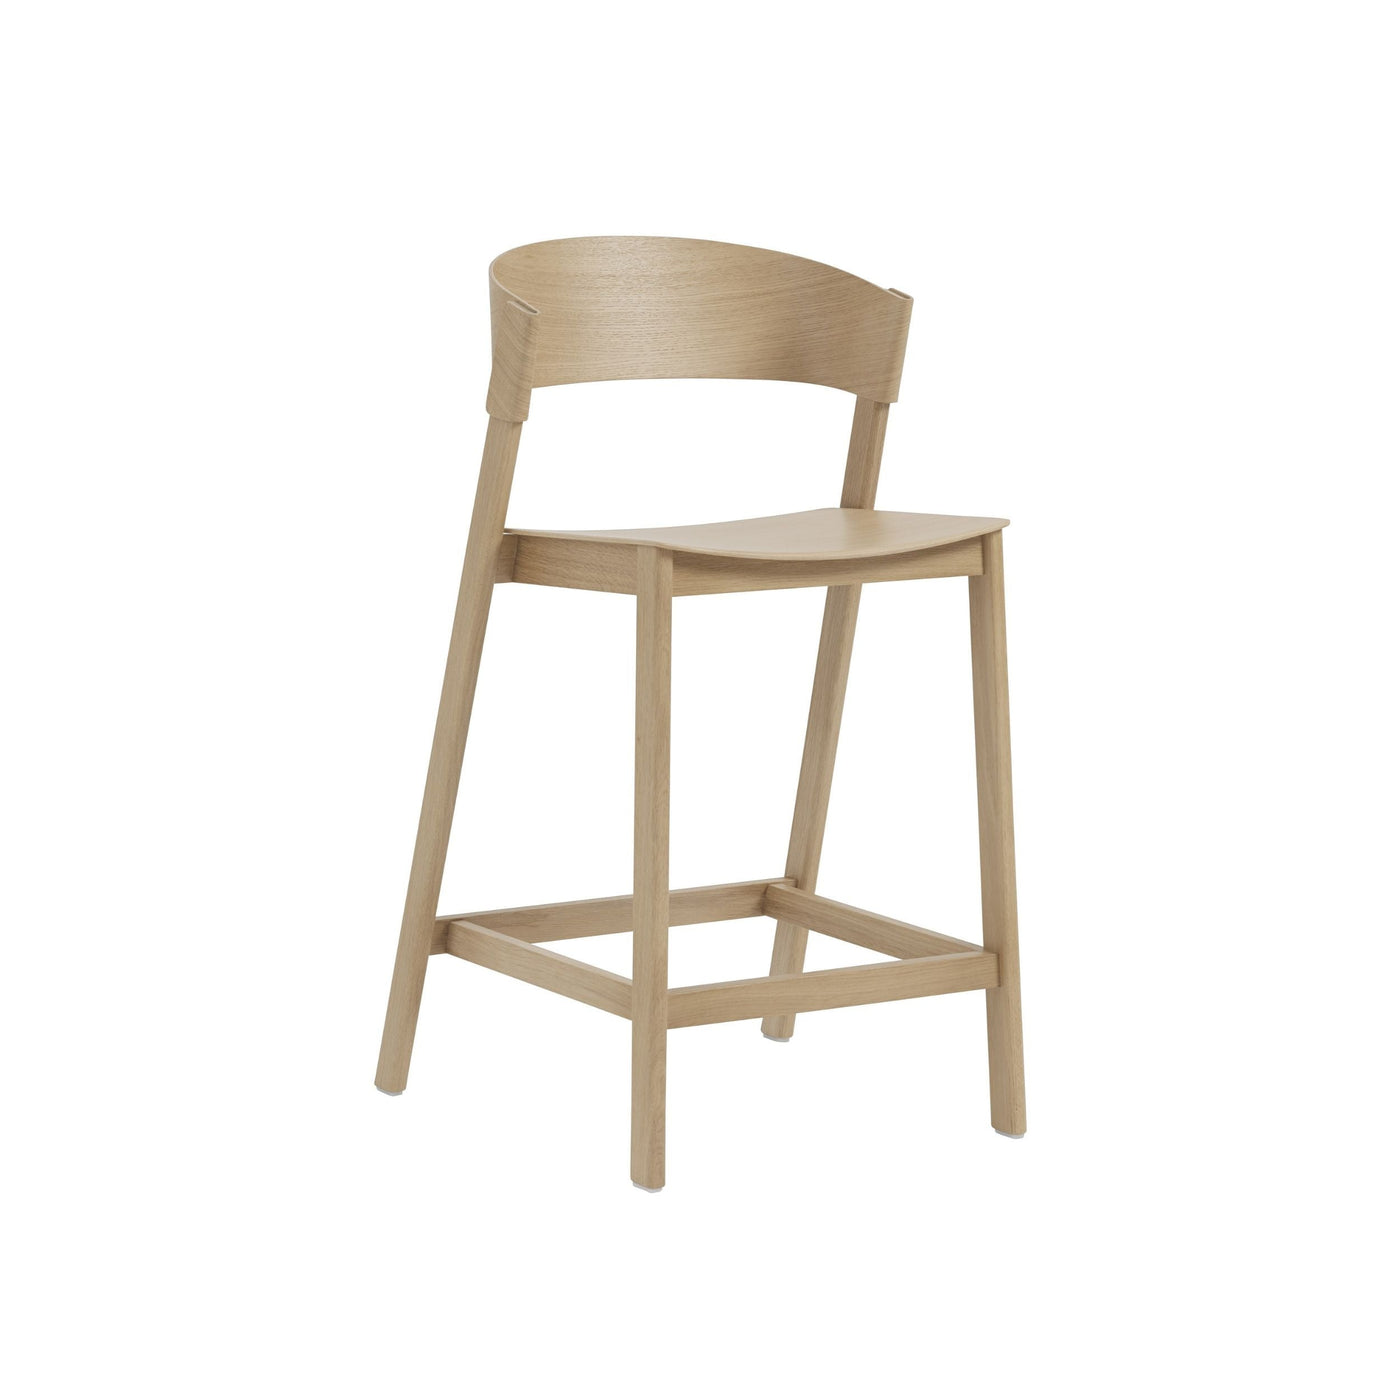 Muuto Cover counter stool 65cm. Shop online at someday designs. #colour_oak